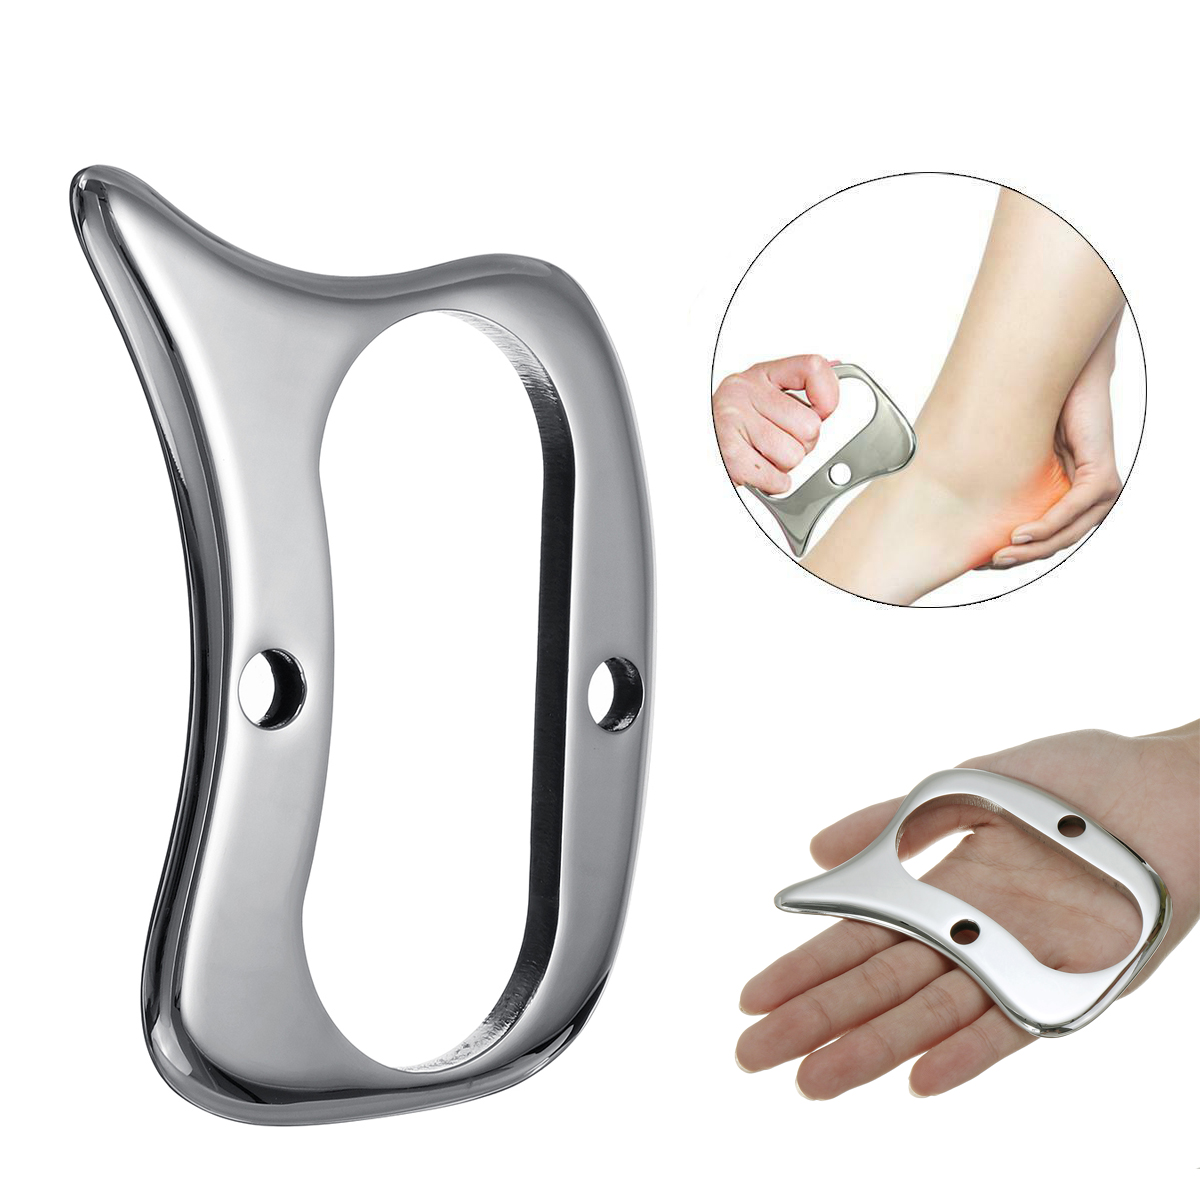 

Stainless Steel Manual Myofascial Release Tool Gua Sha Scraping Board Full Body Muscles Massager